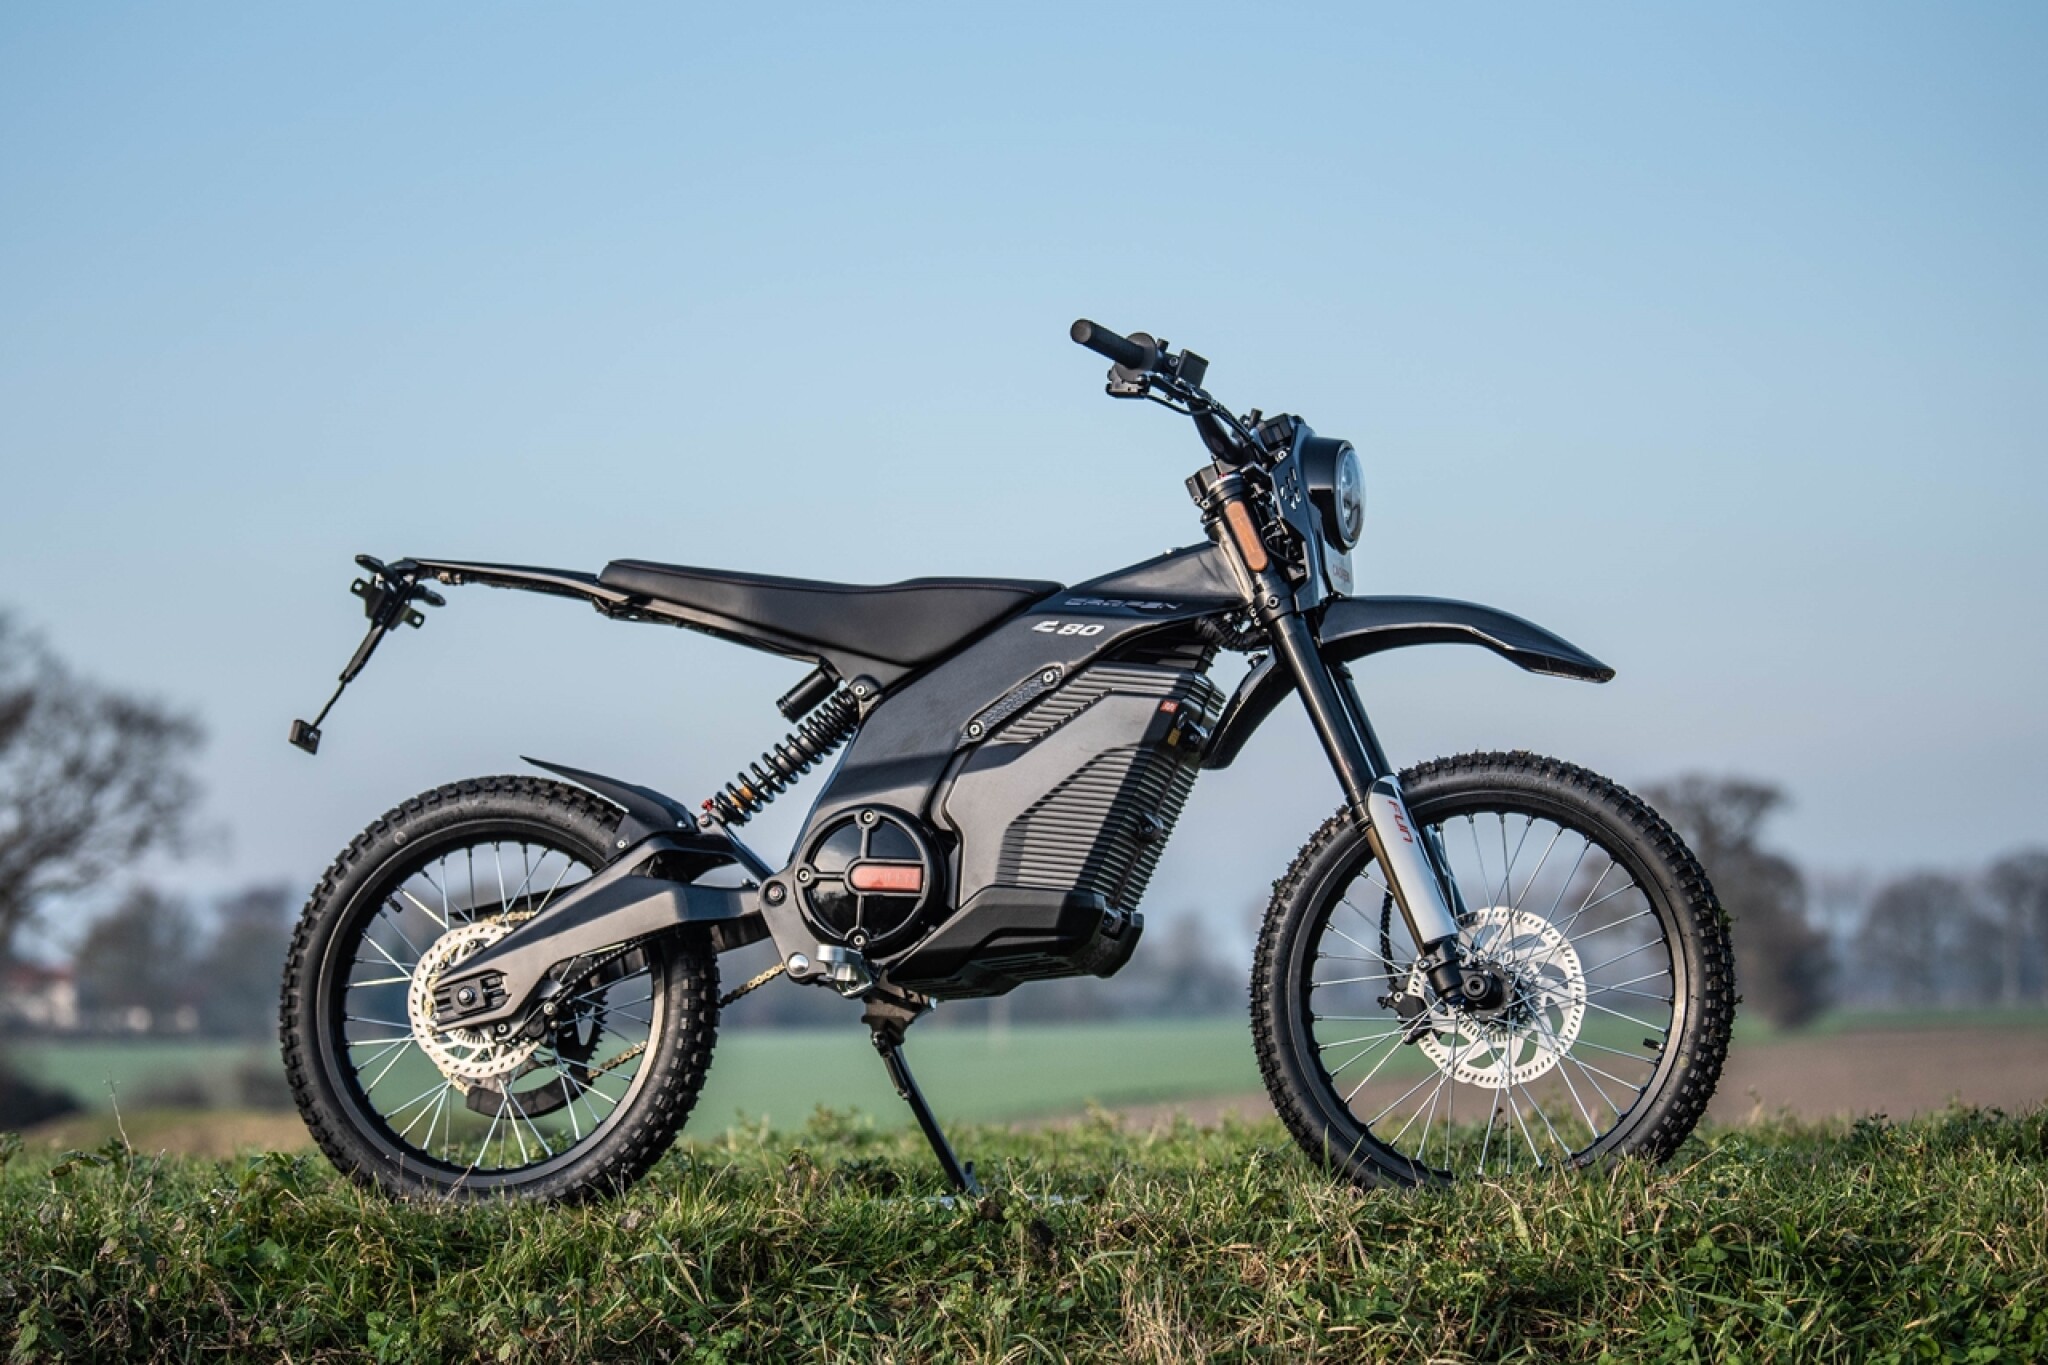 Electric Mopeds, Electric Motorbikes & Motorcycles UK